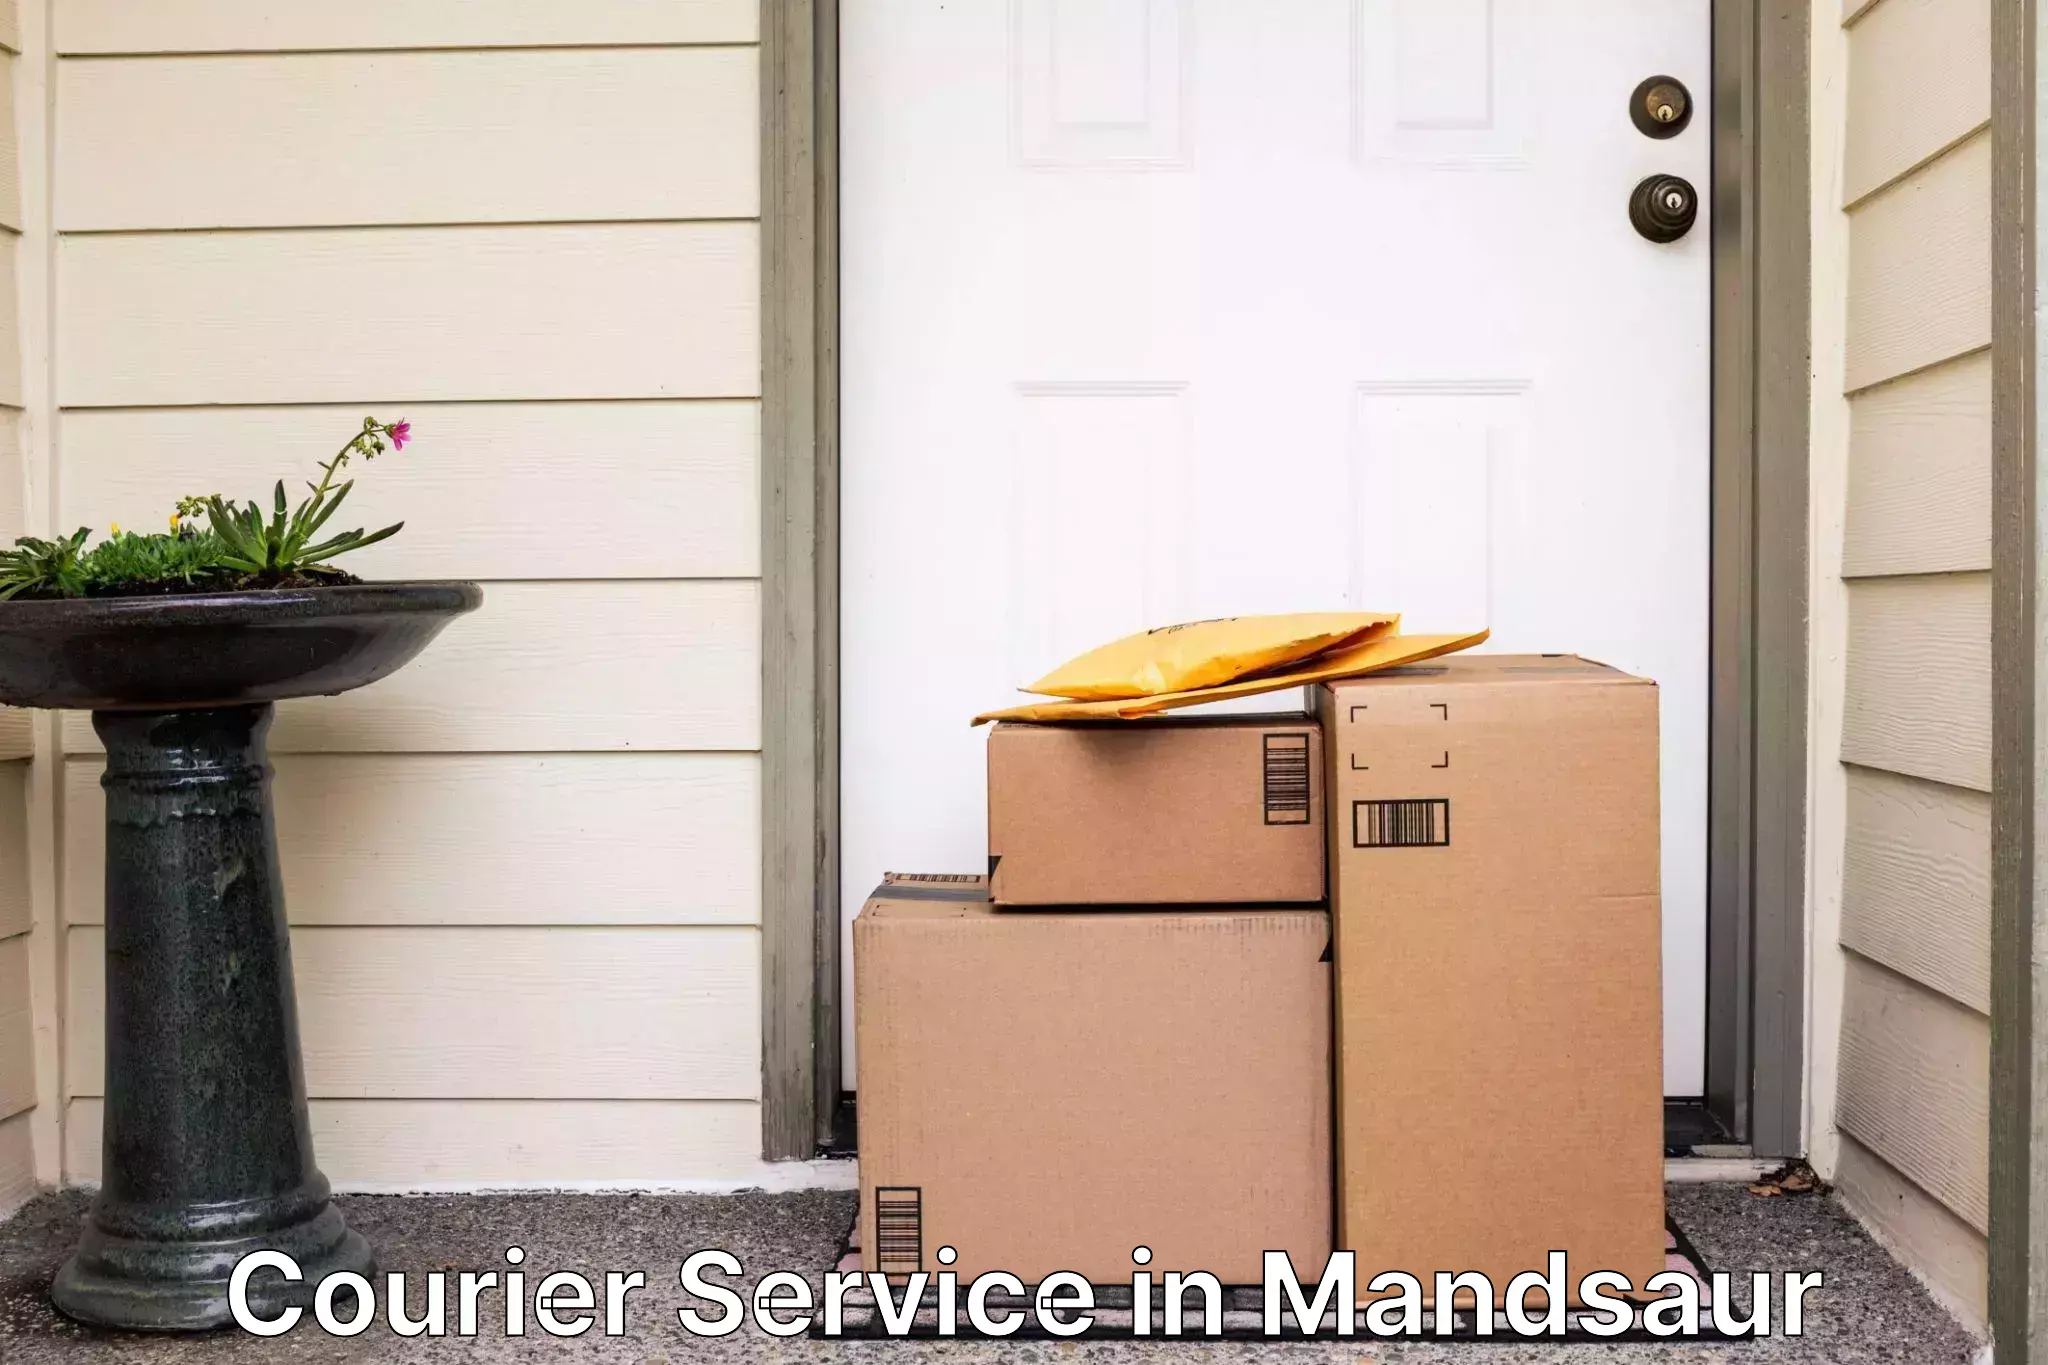 Multi-national courier services in Mandsaur